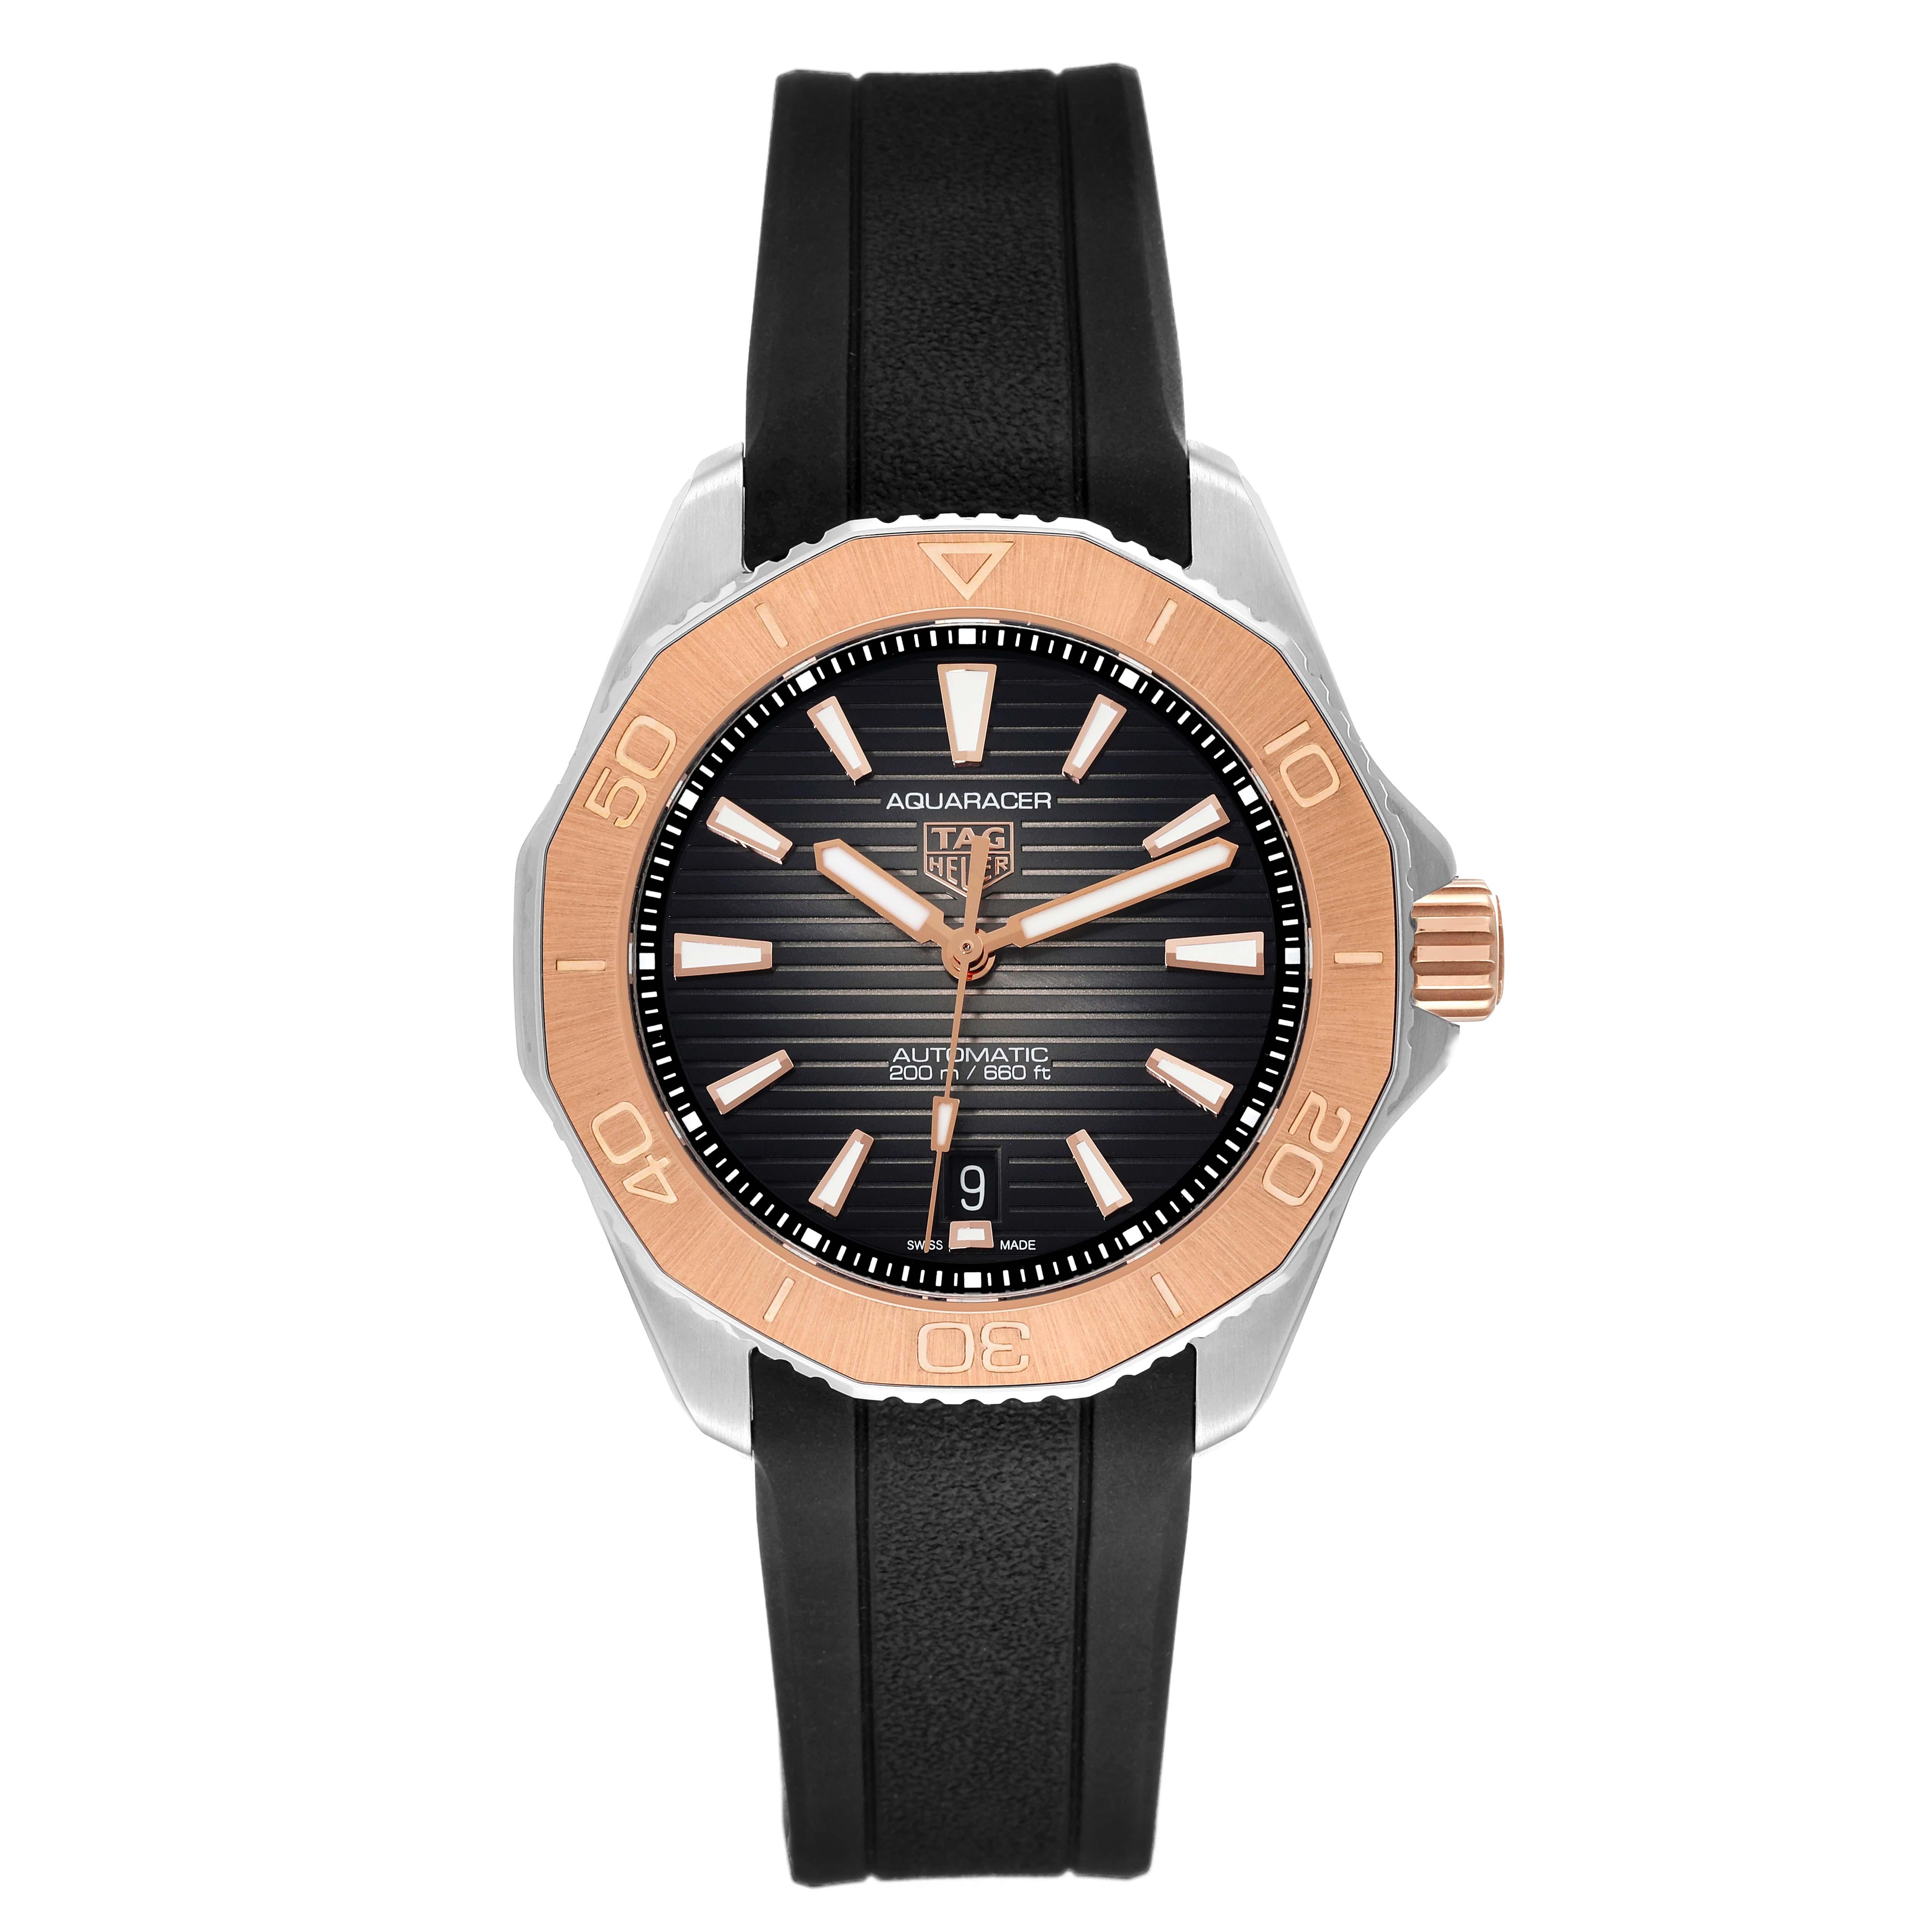 Tag Heuer Aquaracer Professional Steel Rose Gold Mens Watch WBP2151 Unworn. Automatic self-winding movement. Stainless steel case 40.0 mm in diameter. Stainless steel and 18k rose gold unidirectional rotating bezel. Scratch resistant sapphire